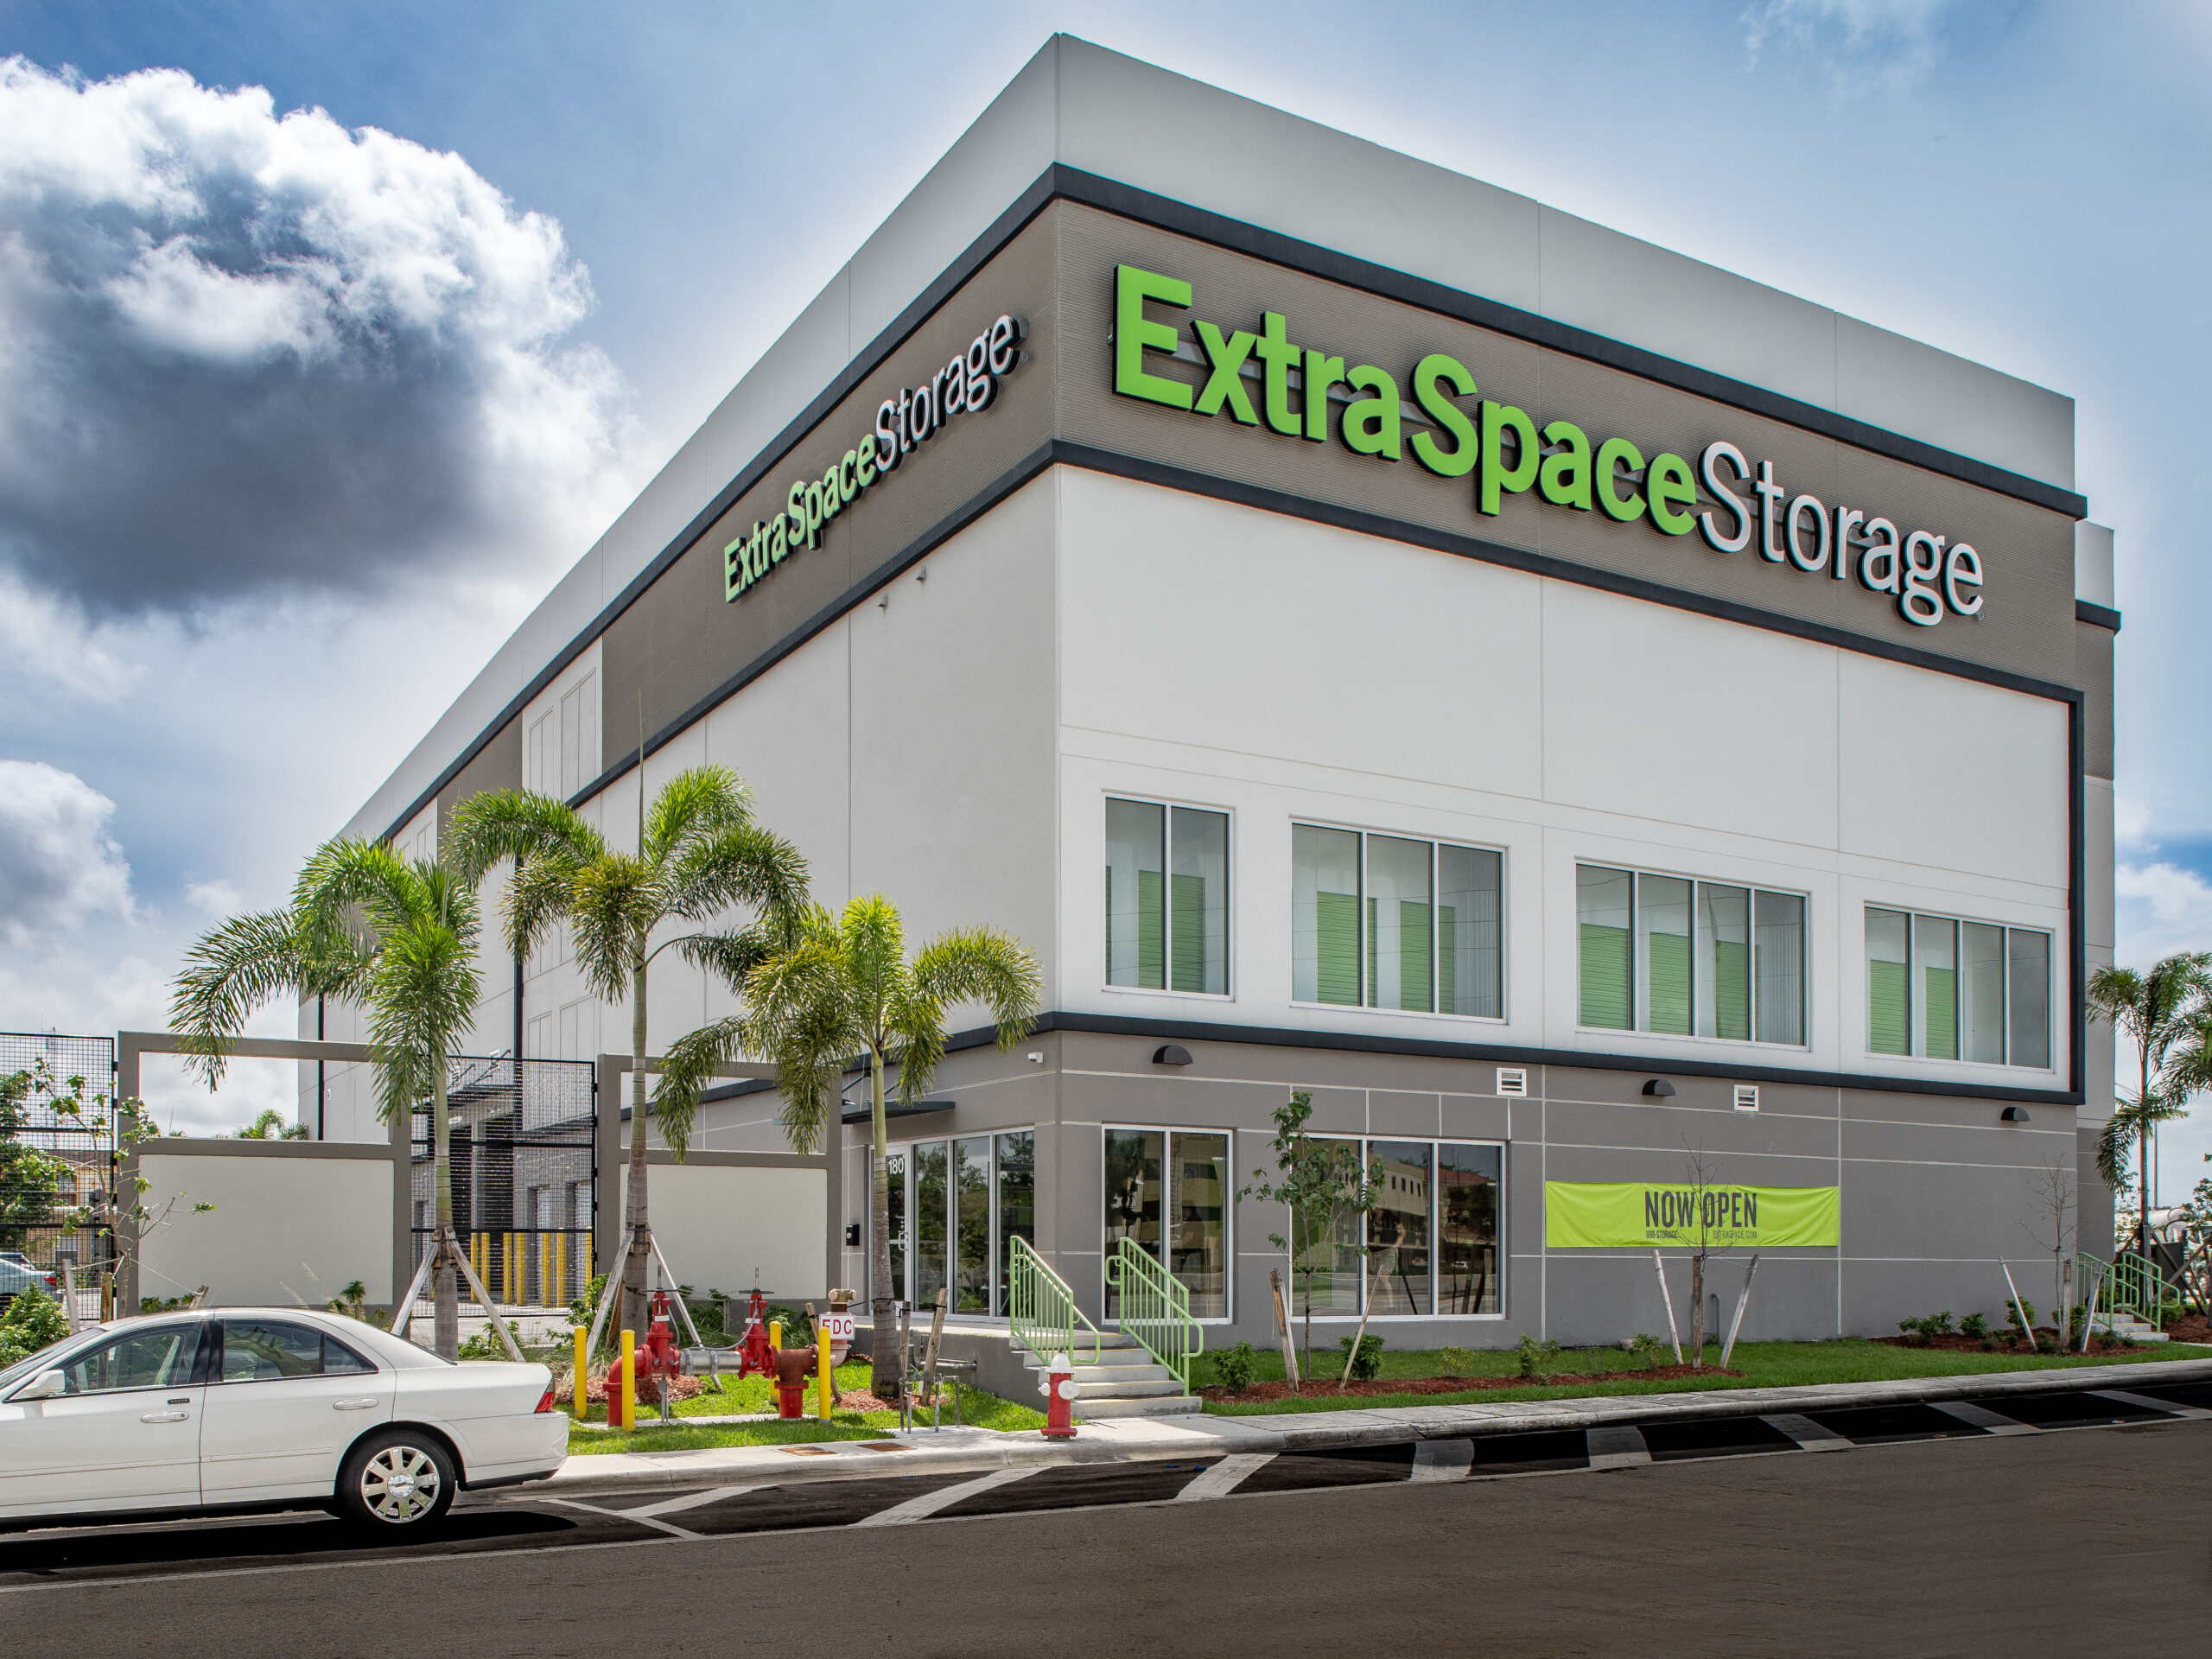 An Extra Space Storage facility with a sign that says "Now Open"